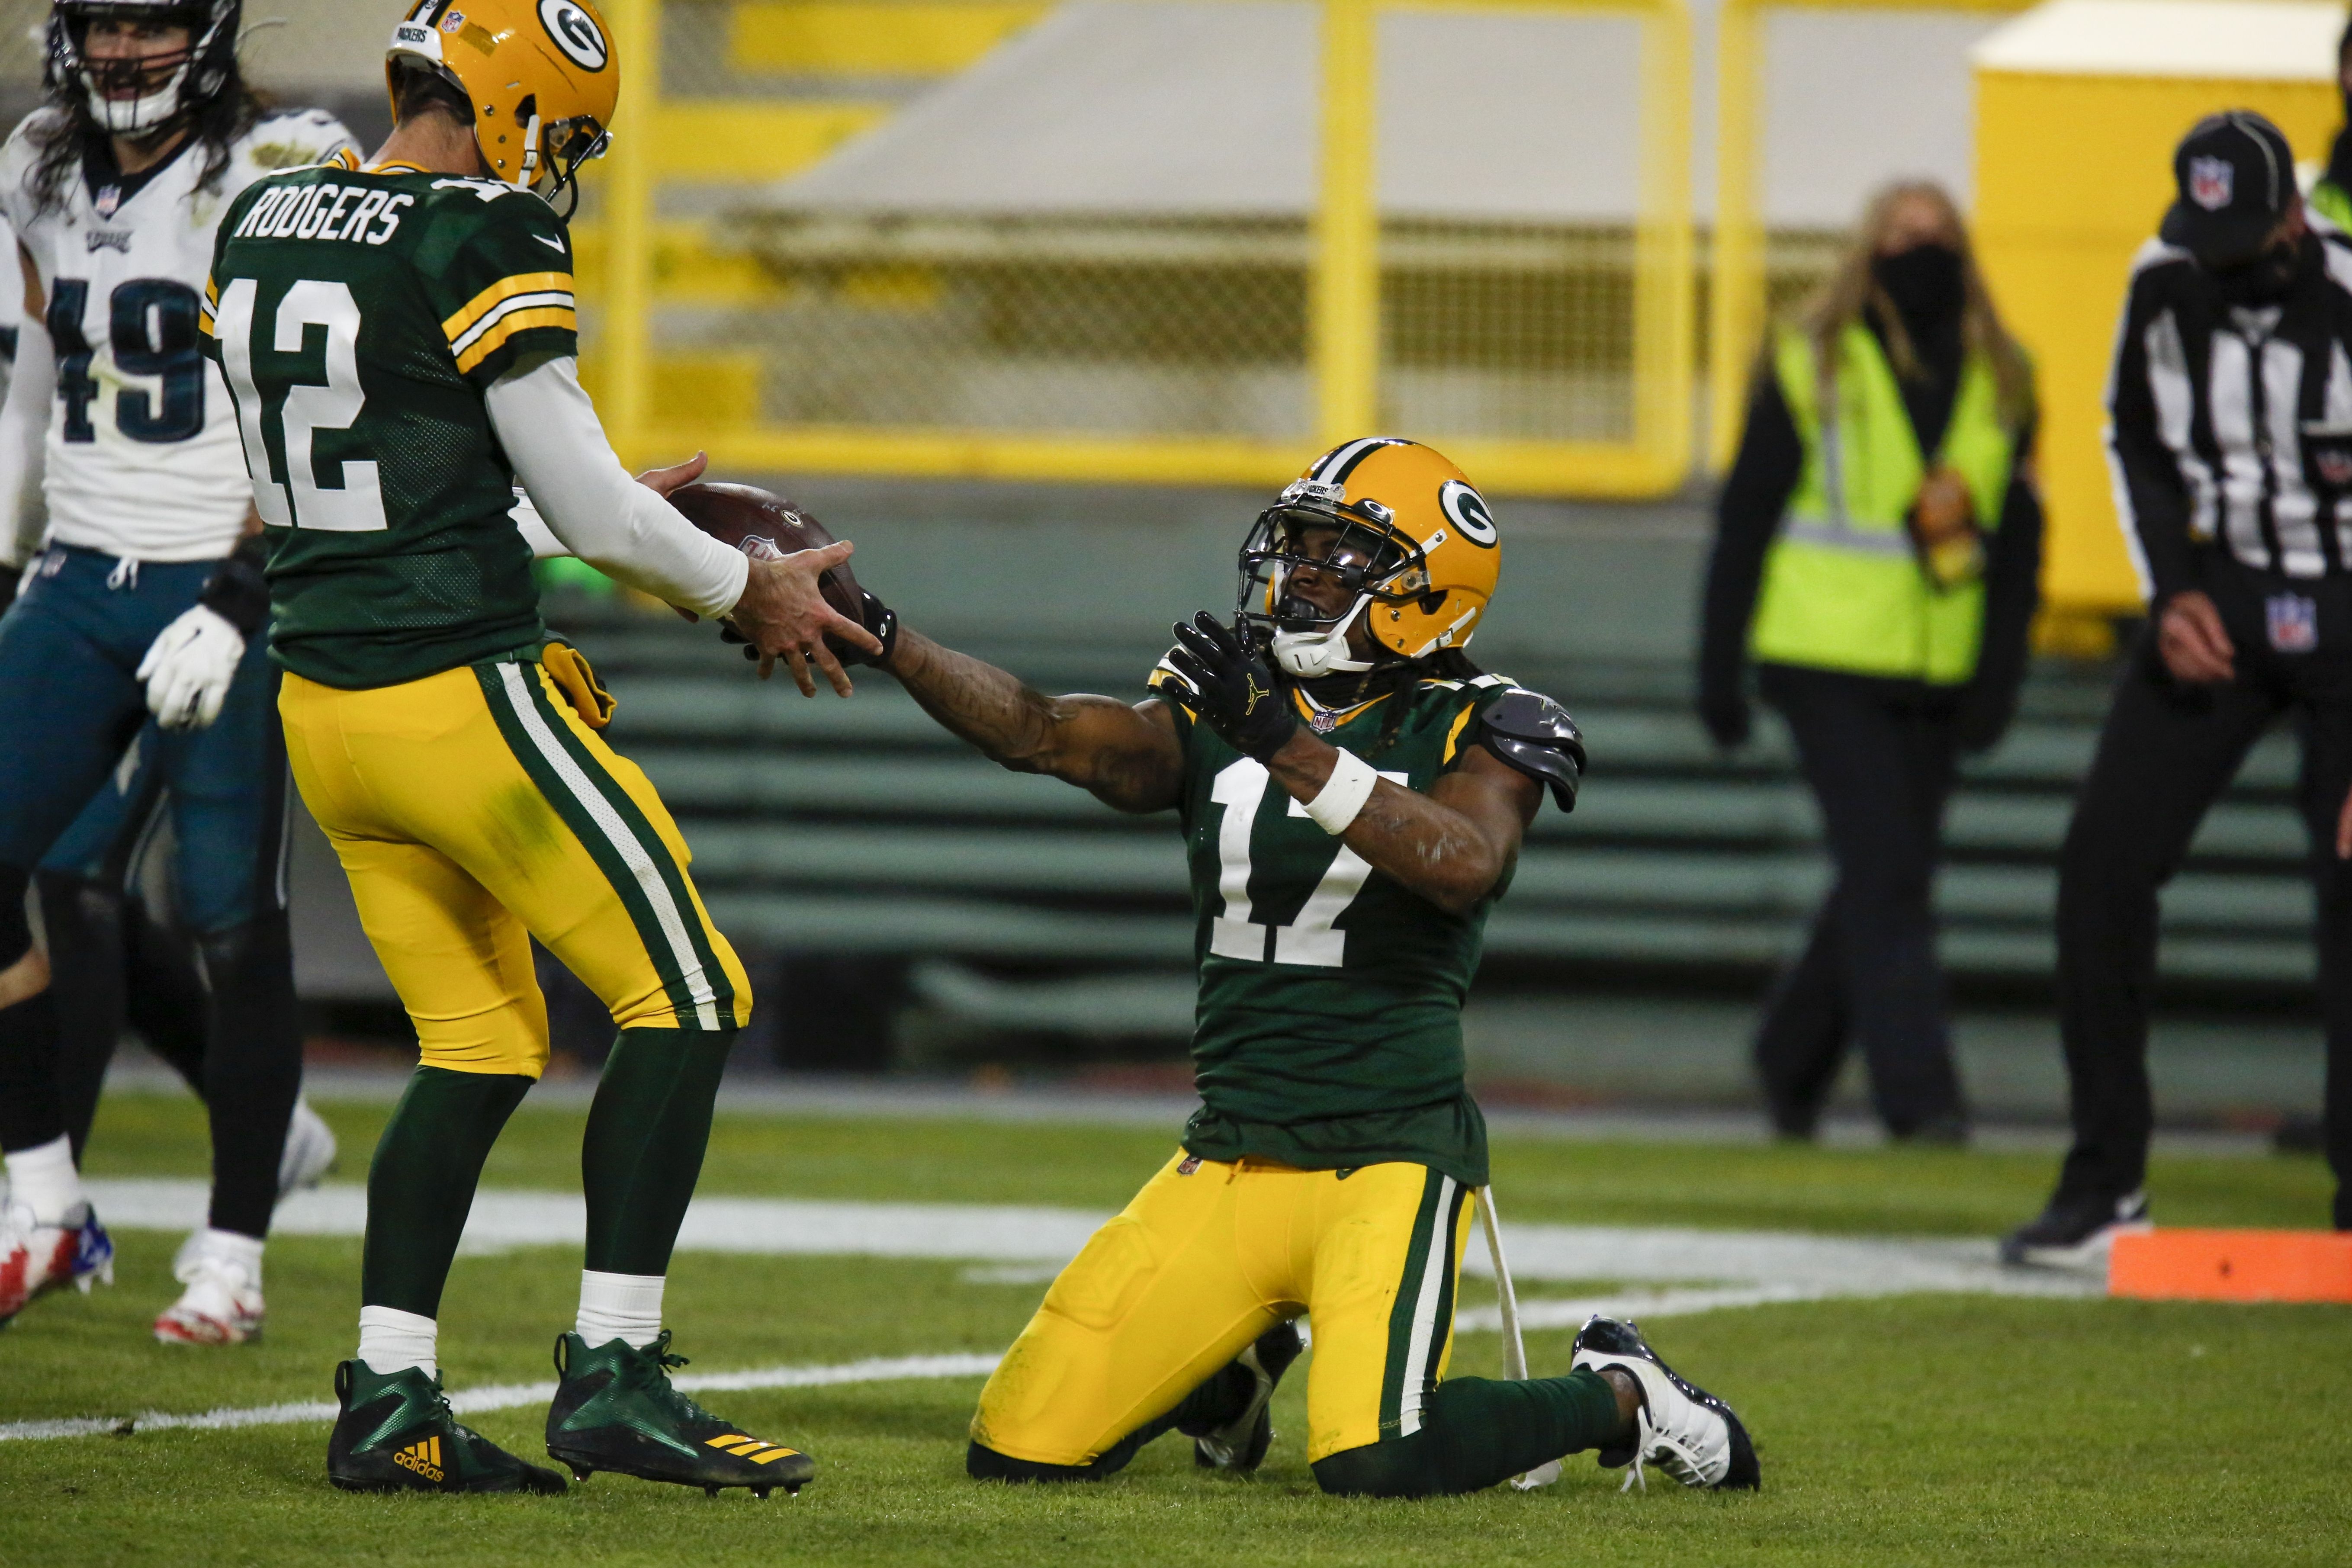 Rodgers becomes fastest to 400 TD passes, Packers hold off Eagles 30-16